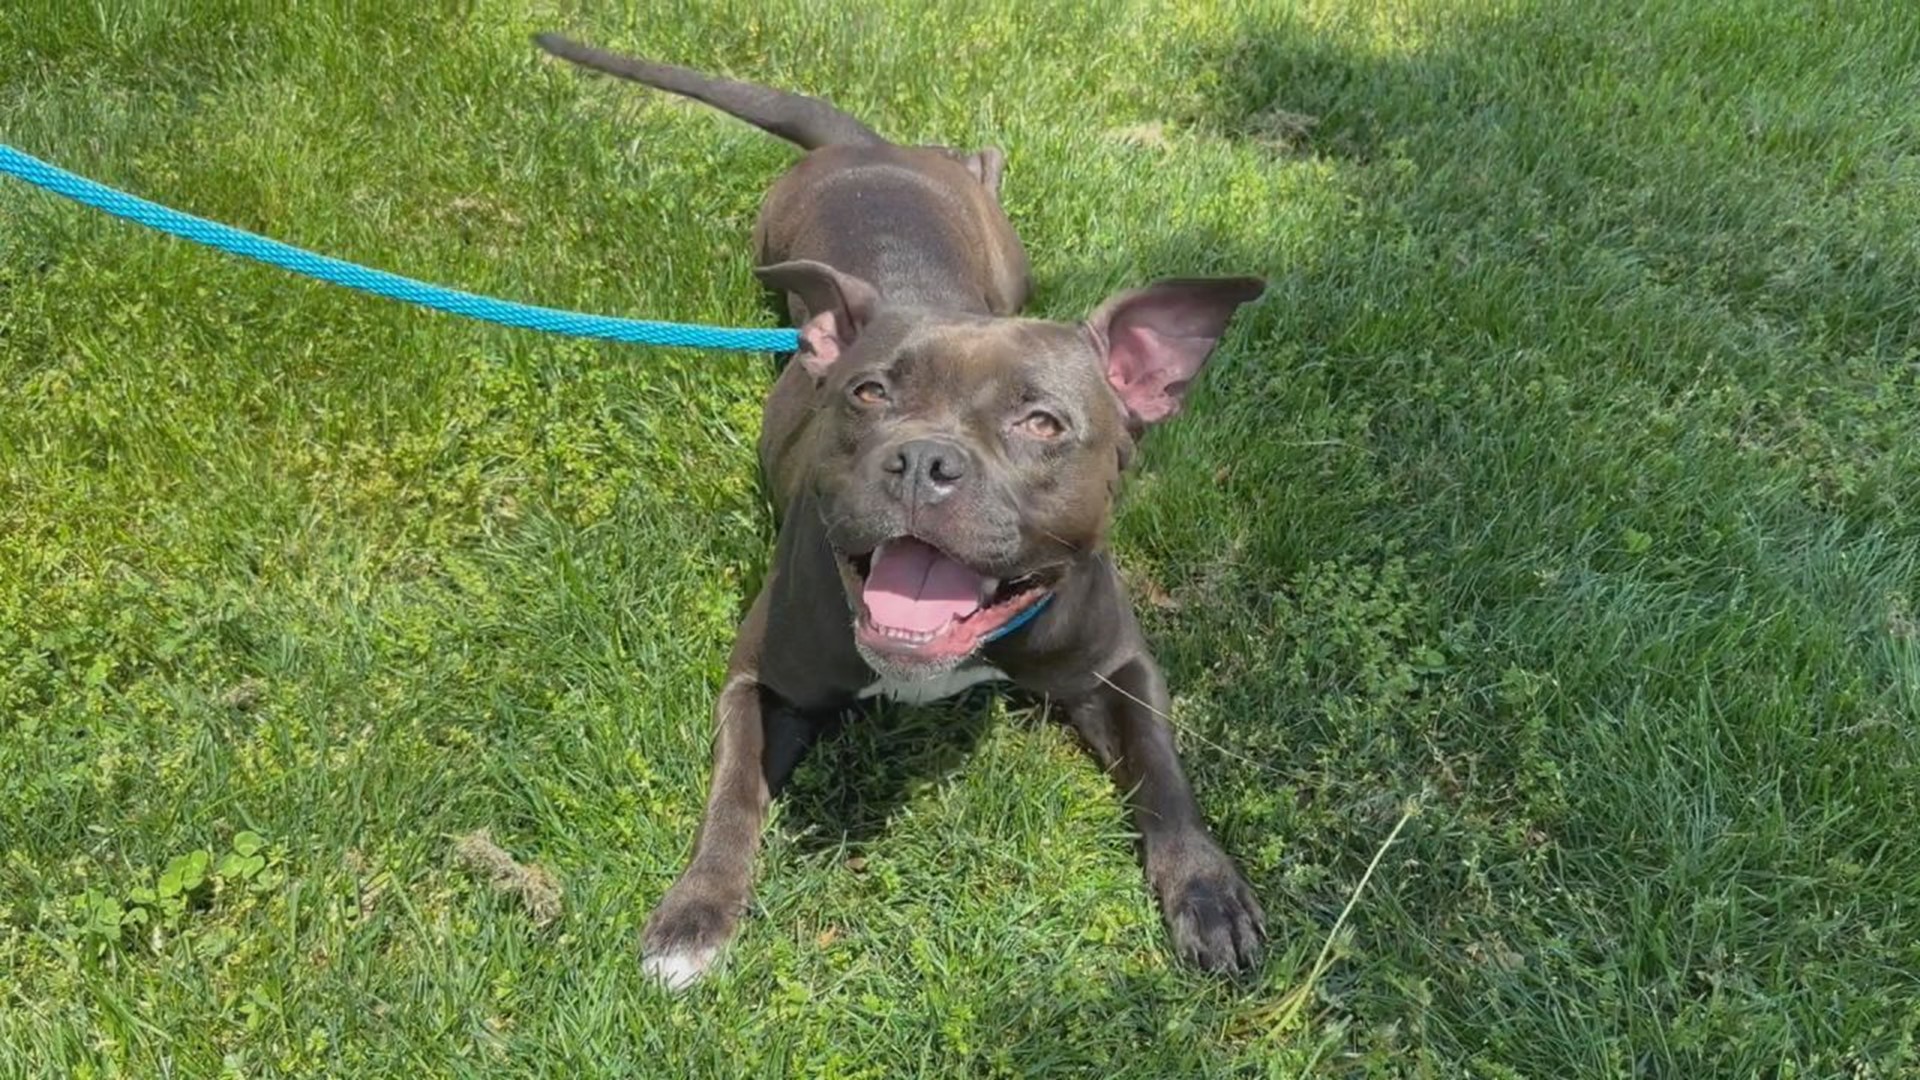 Gremlin is a young, laid back American Bully who is looking for her forever family at the York County SPCA.